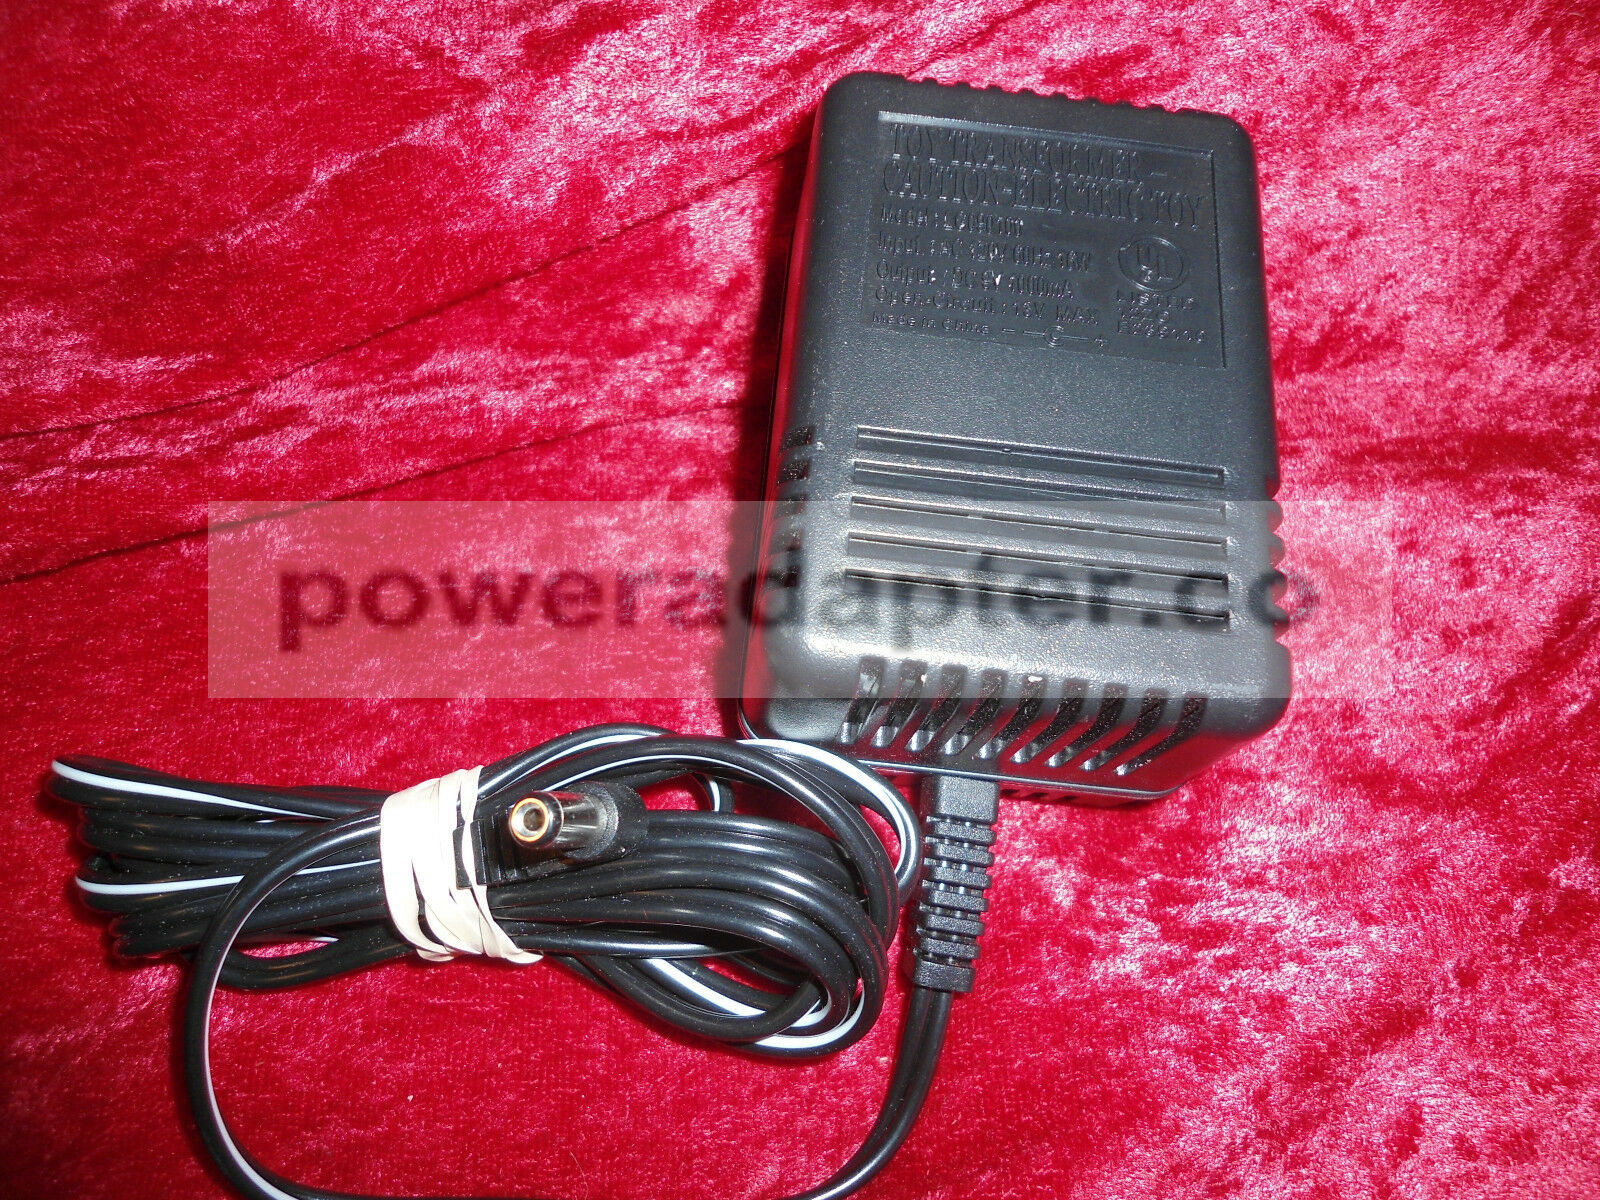 Toy Transformer LG090100 AC DC Power Adapter Output 9V 1000mA E239110 Condition: Used: An item that has been used p